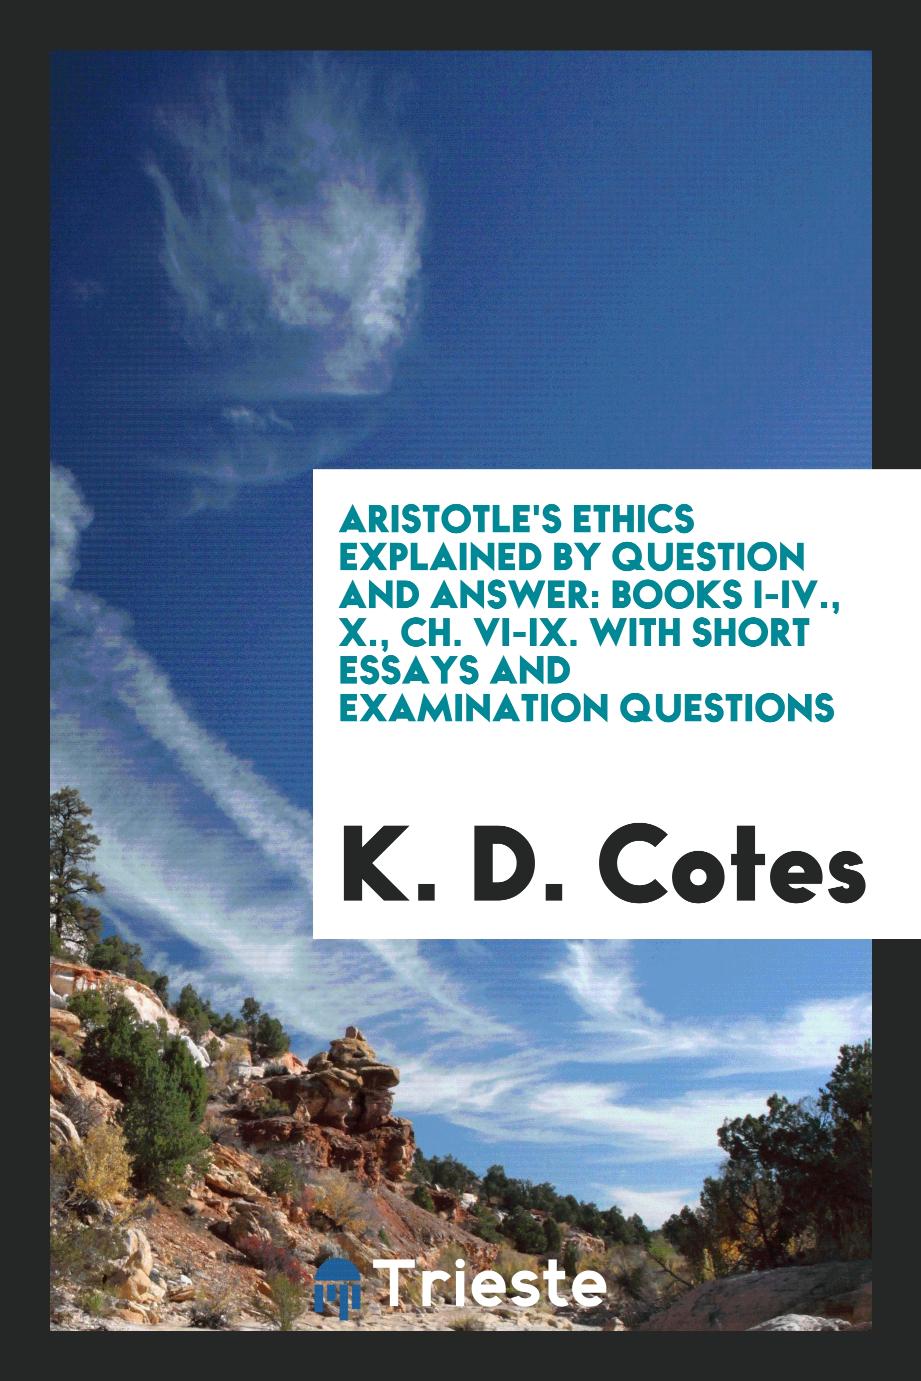 Aristotle's Ethics Explained by Question and Answer: Books I-IV., X., Ch. VI-IX. With Short Essays and Examination Questions